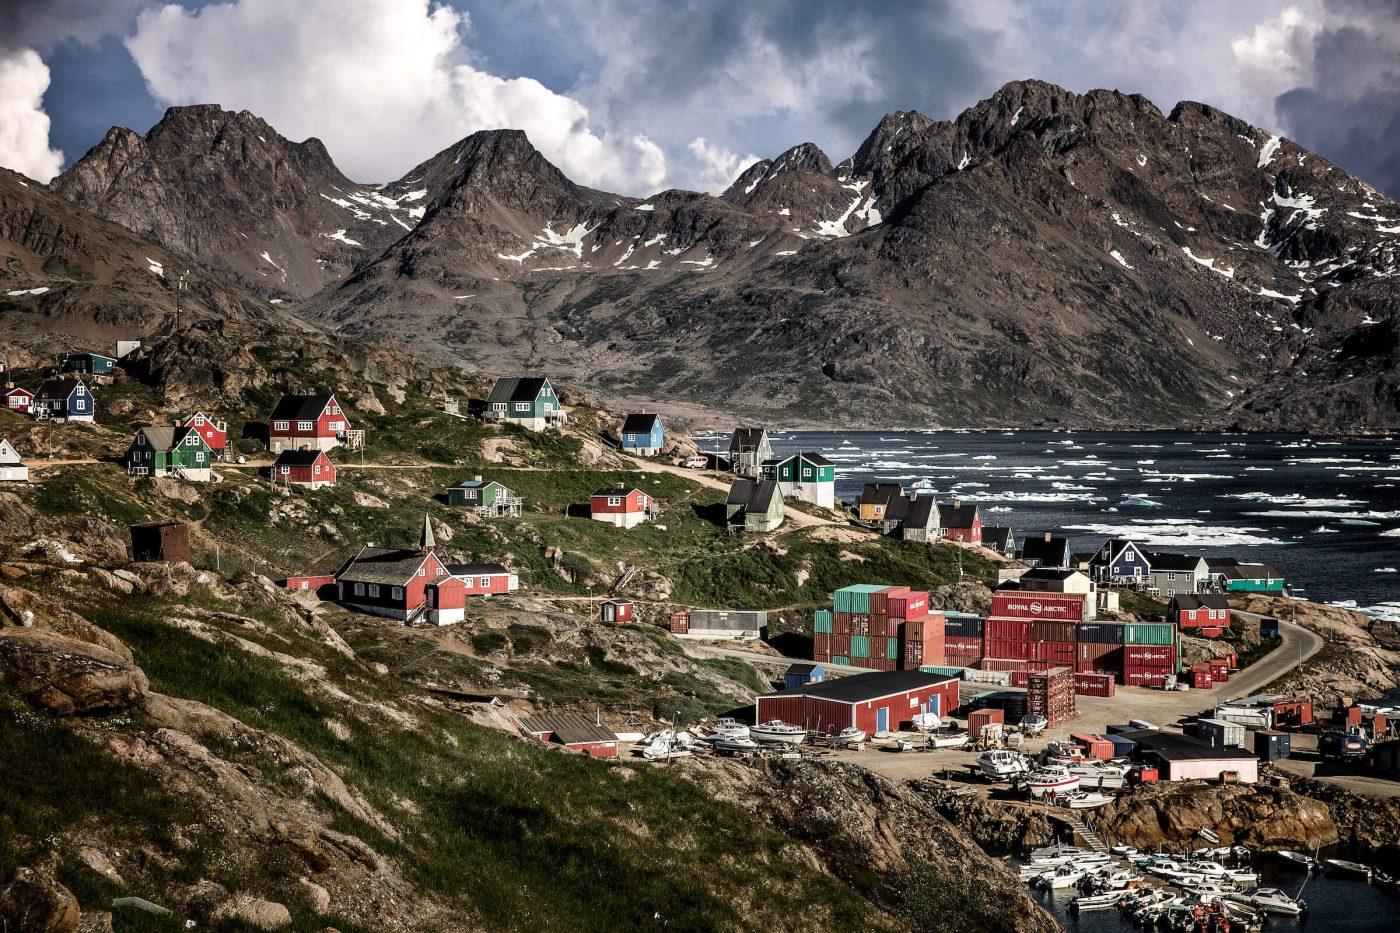 A summer view over parts of Tasiilaq in East Greenland, by Mads Pihl